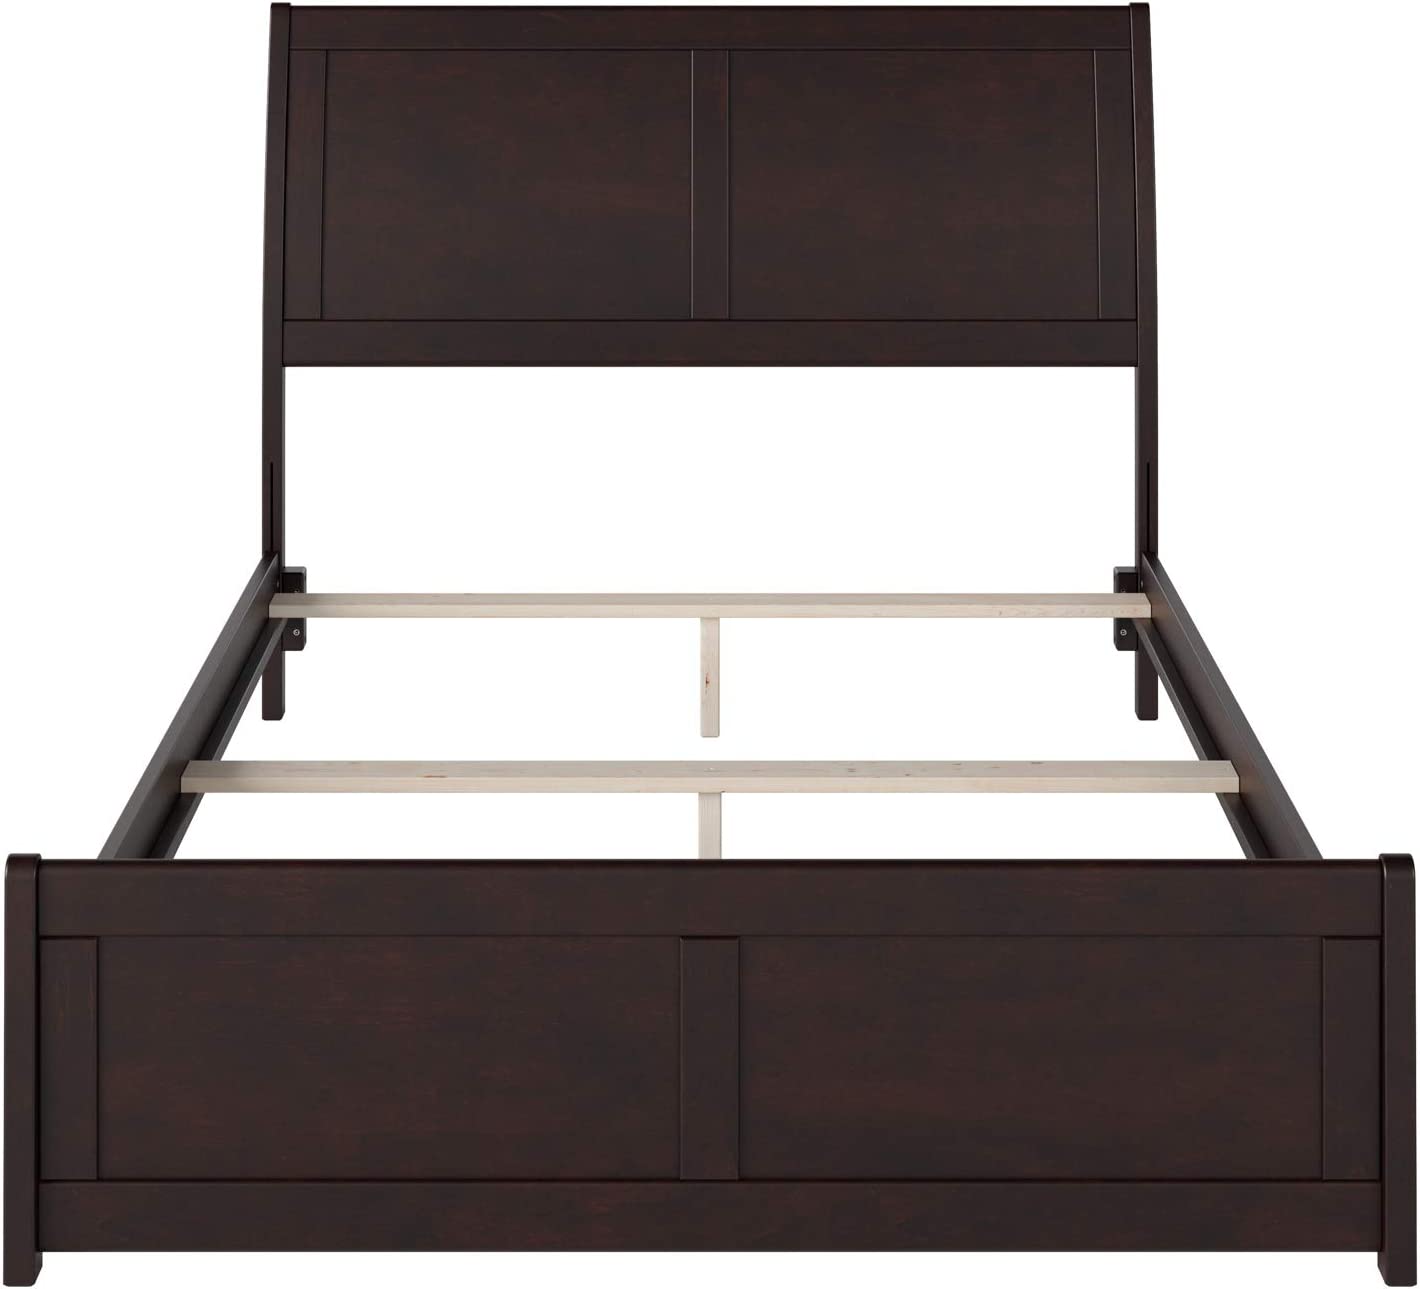 AFI Portland Traditional Bed with Matching Footboard and Turbo Charger, Full, Espresso